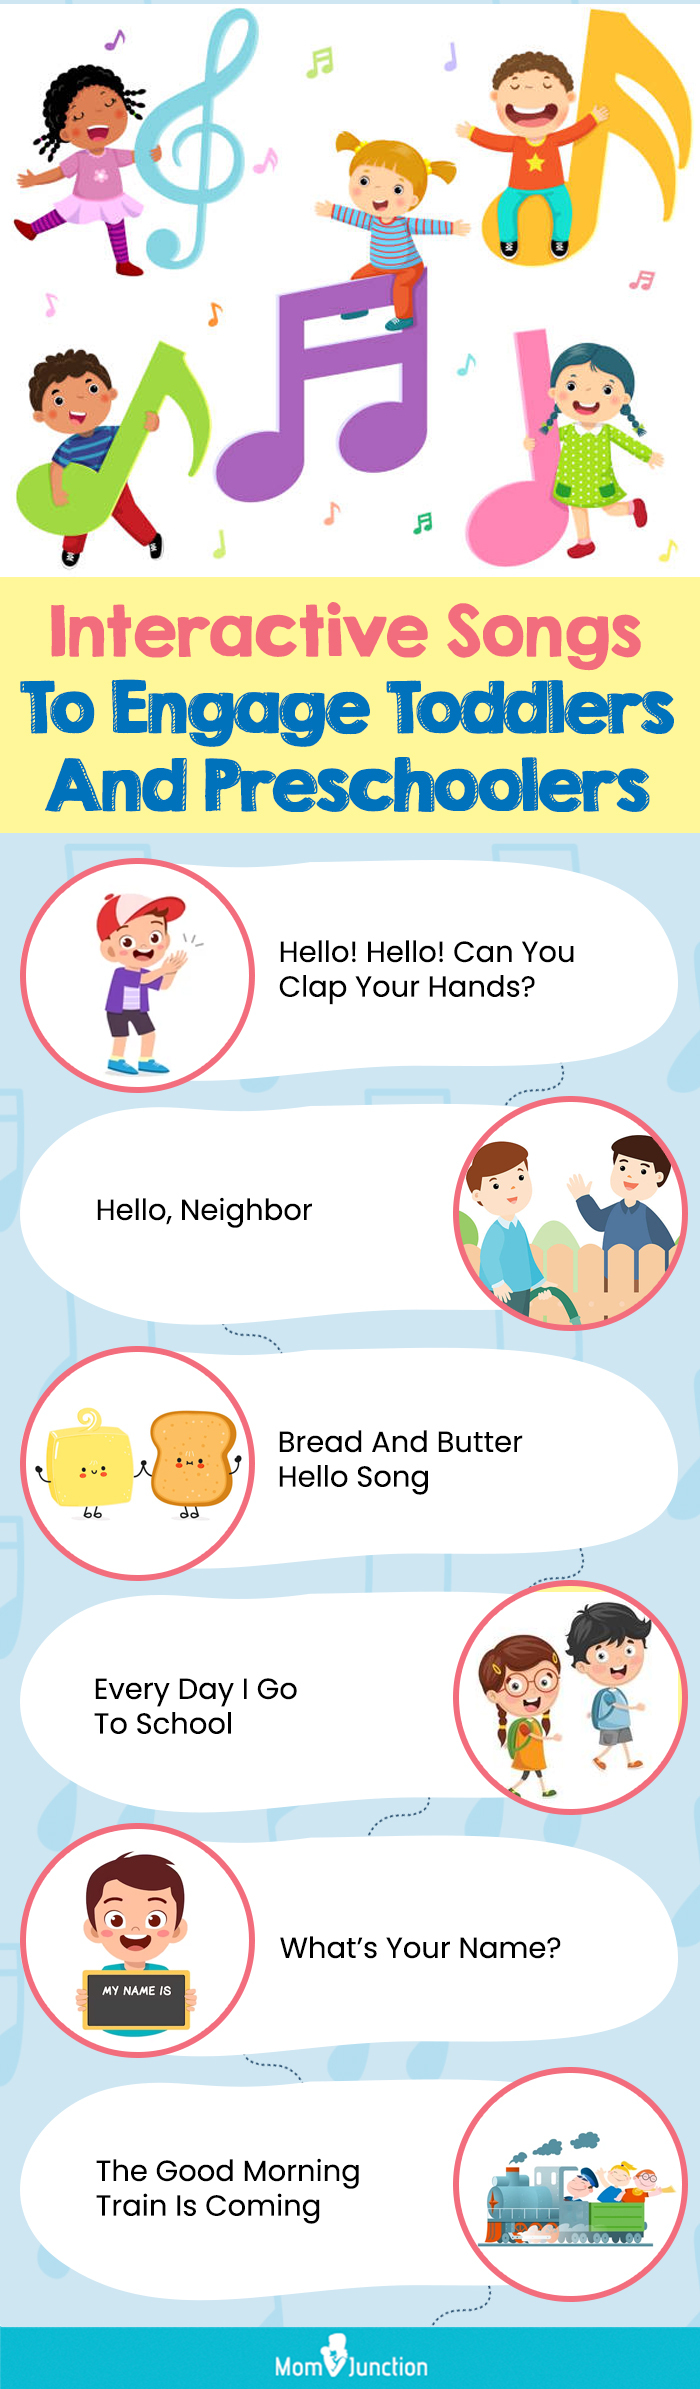 interactive songs to engage toddlers and preschoolers (infographic)